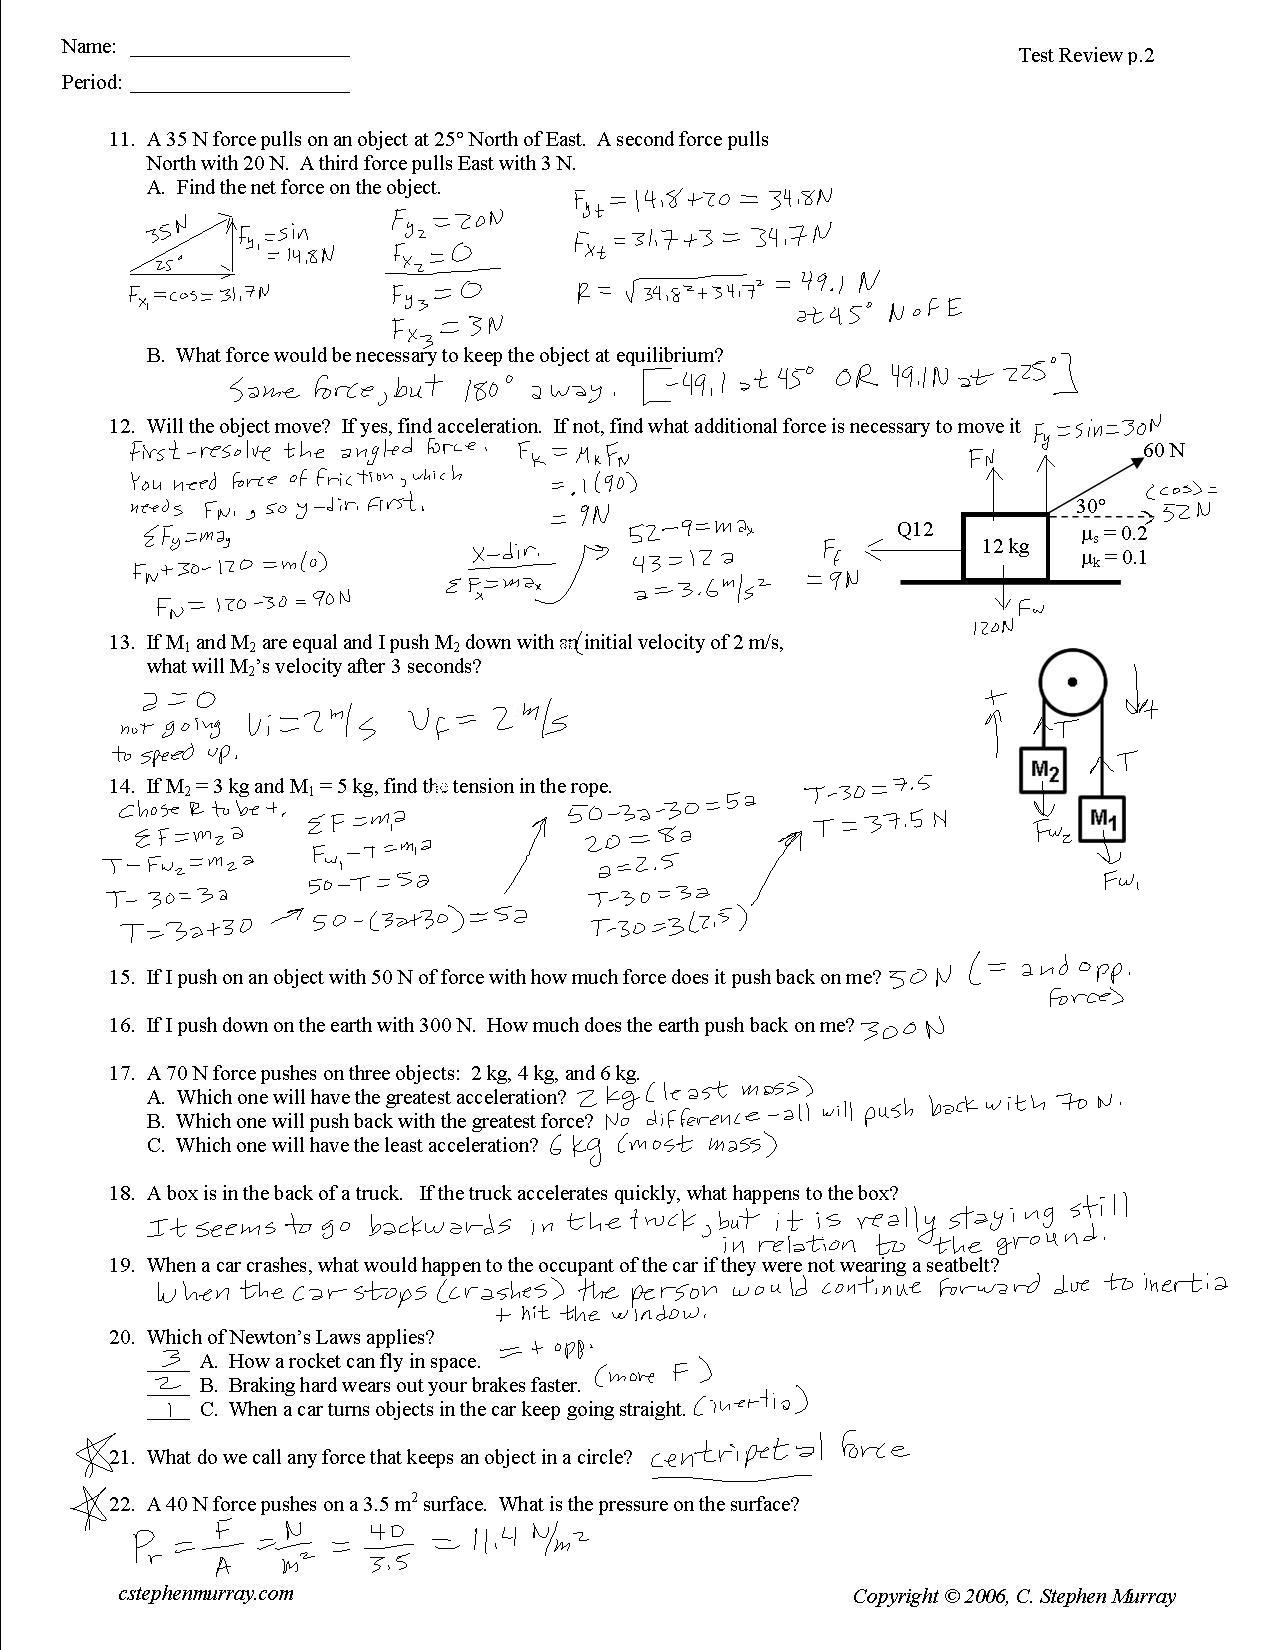 Physics Worksheet Answers Intended For Newton039s Second Law Worksheet